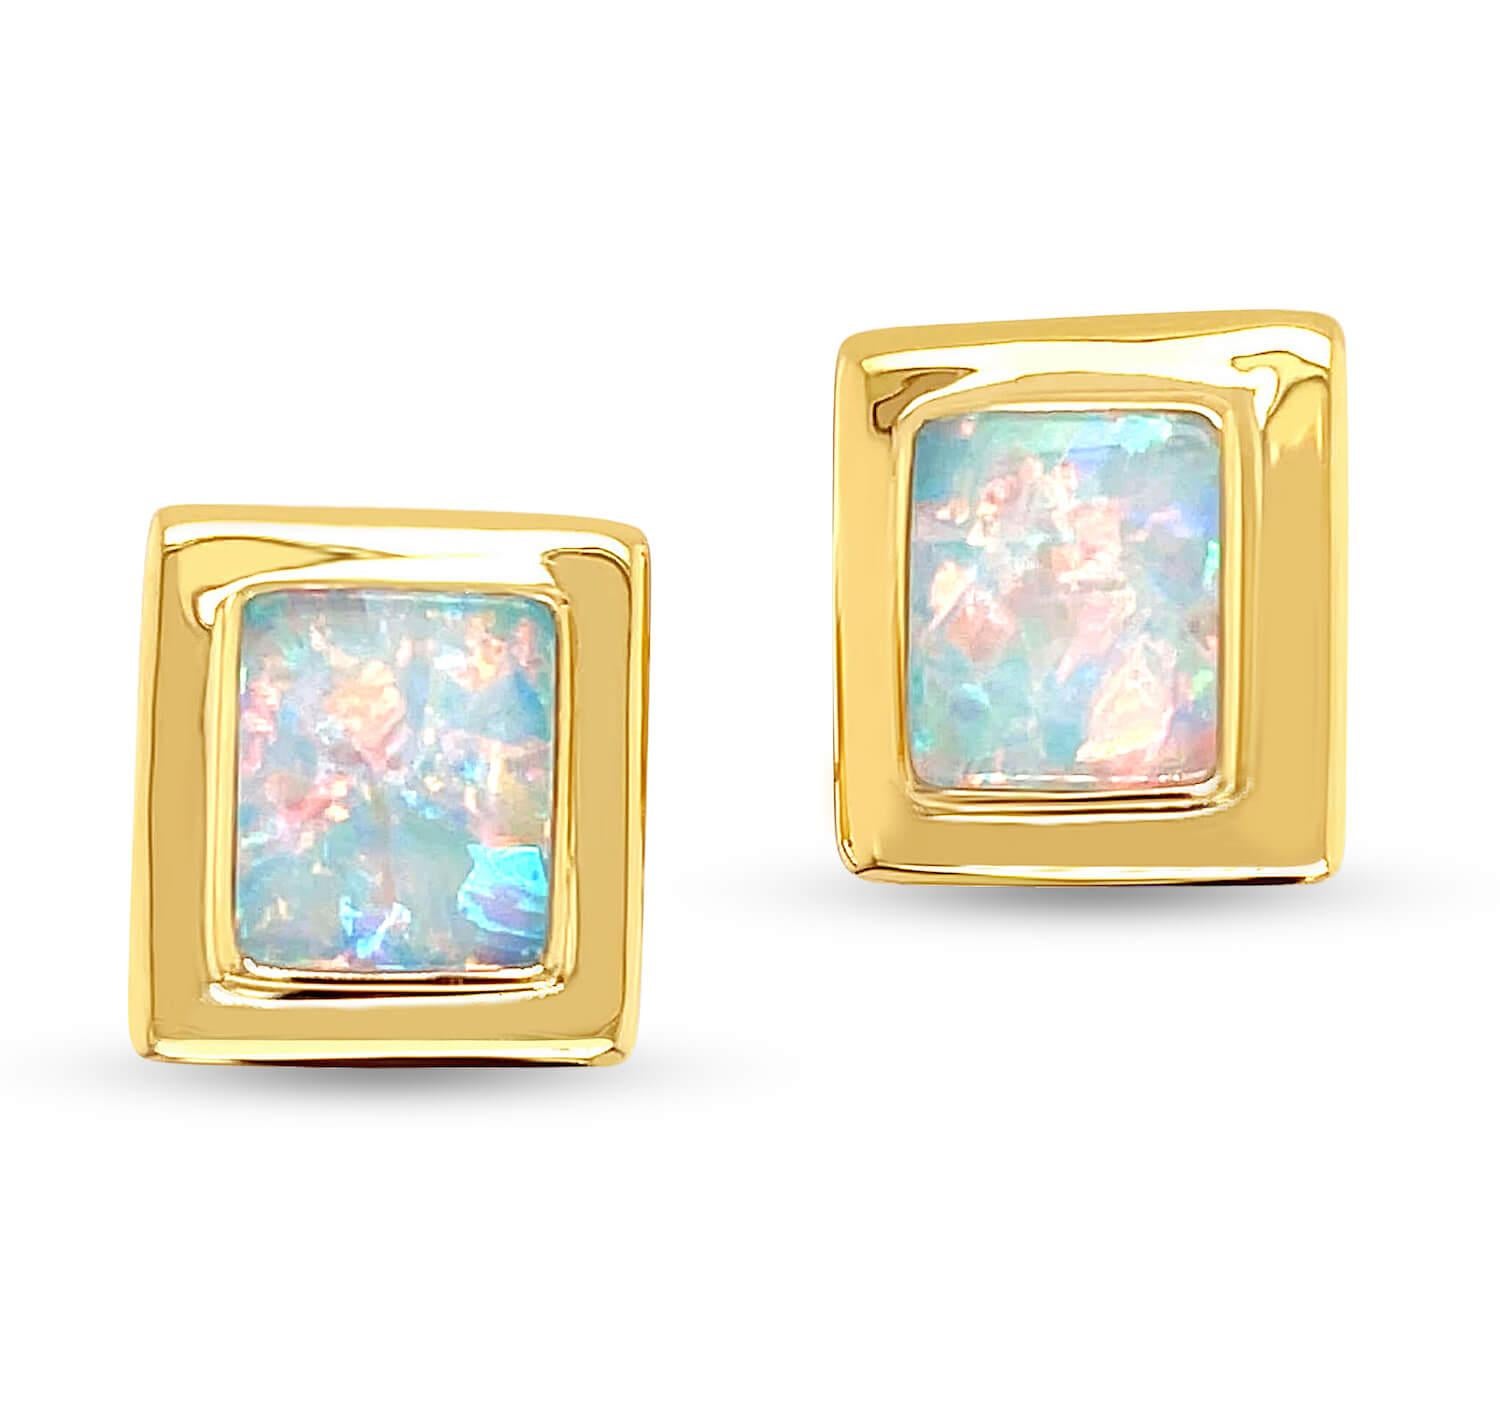 The classic design of these Australian opal cufflinks exudes a masculine look that is ideal for any formal occasion, from the office to an important dinner. Expertly crafted in 18k gold, they are set with exquisite precious opal from Lightning